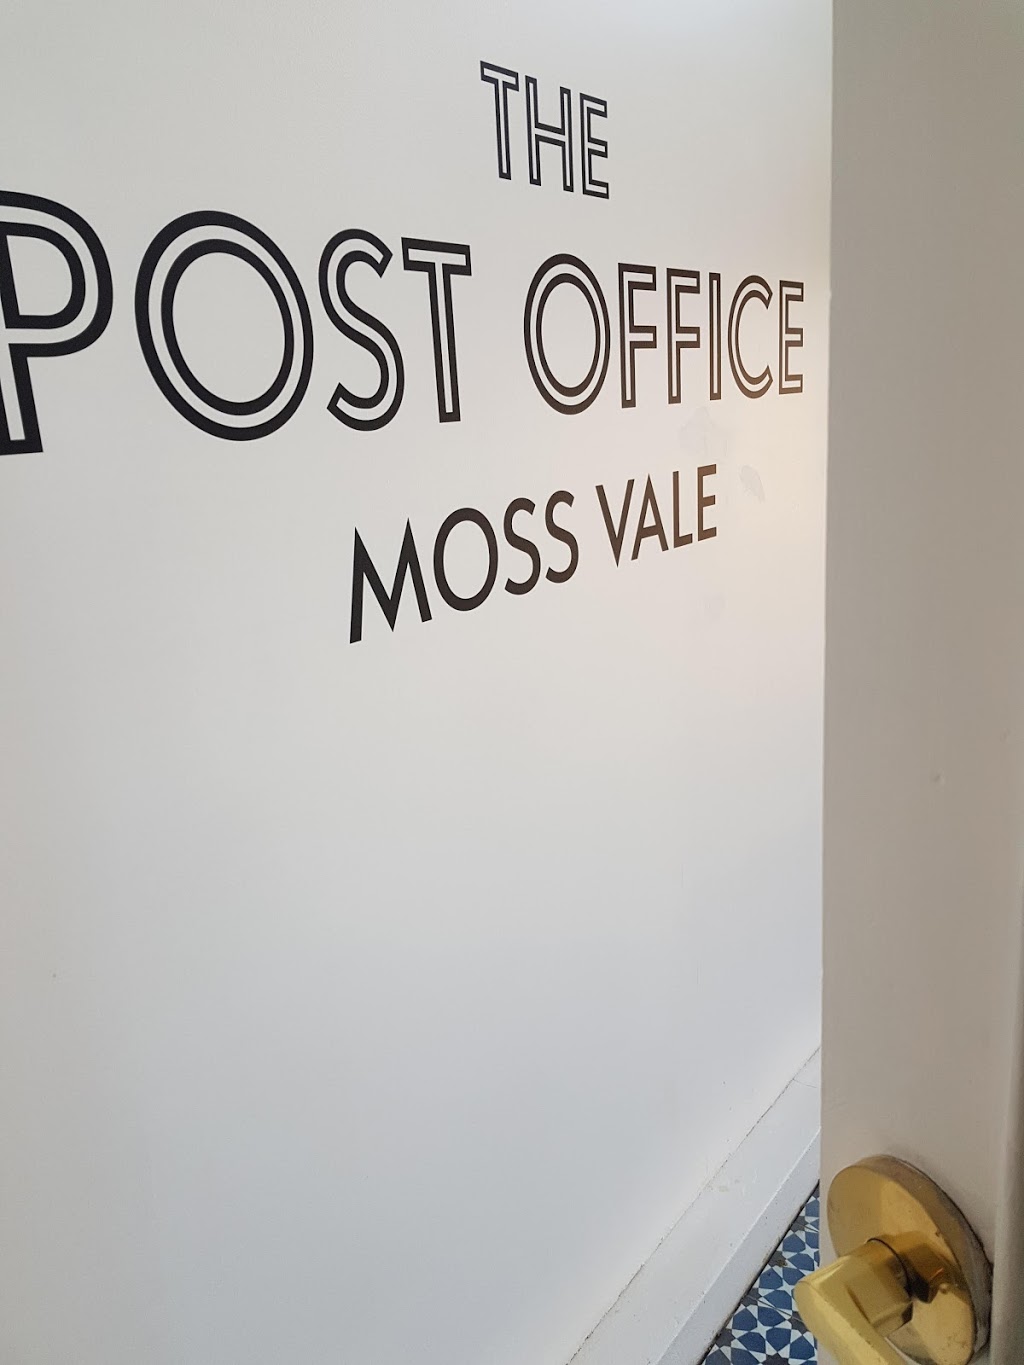 The Post Office Cafe Moss Vale | cafe | 1/249 Argyle St, Moss Vale NSW 2577, Australia | 0248701264 OR +61 2 4870 1264